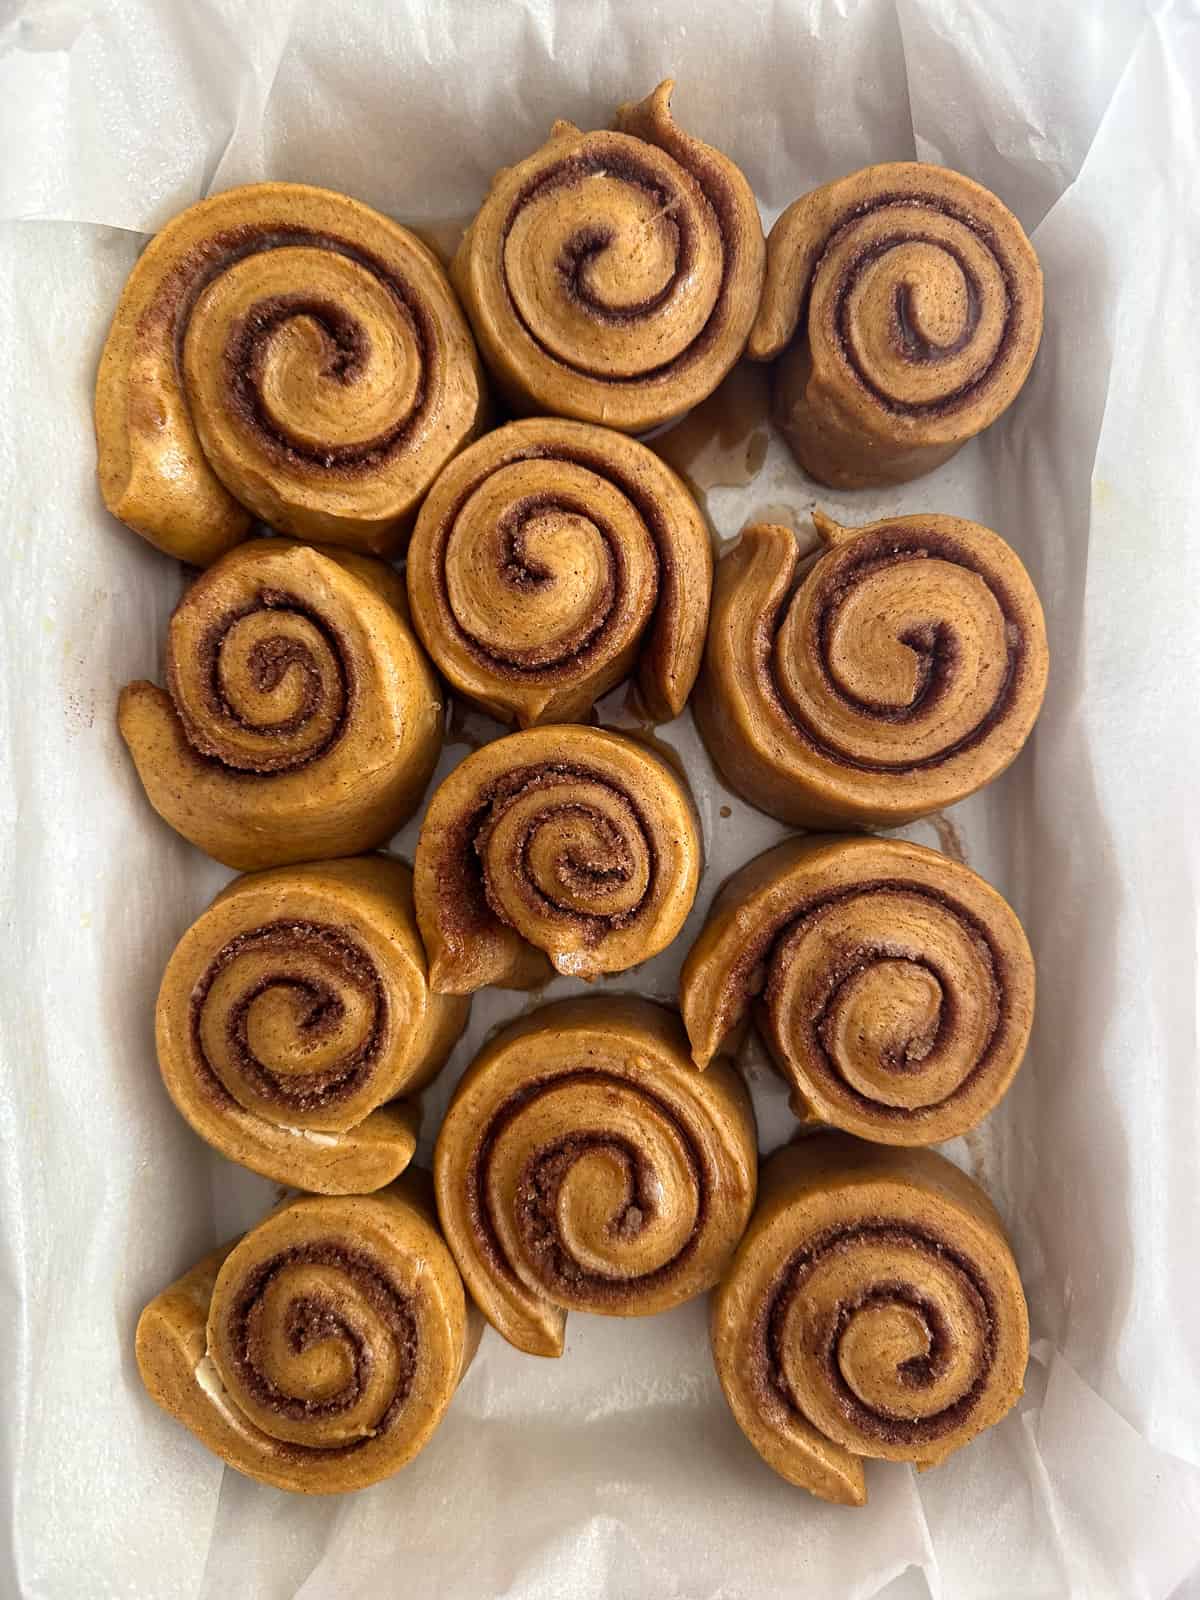 Buns after rising and just before baking. 